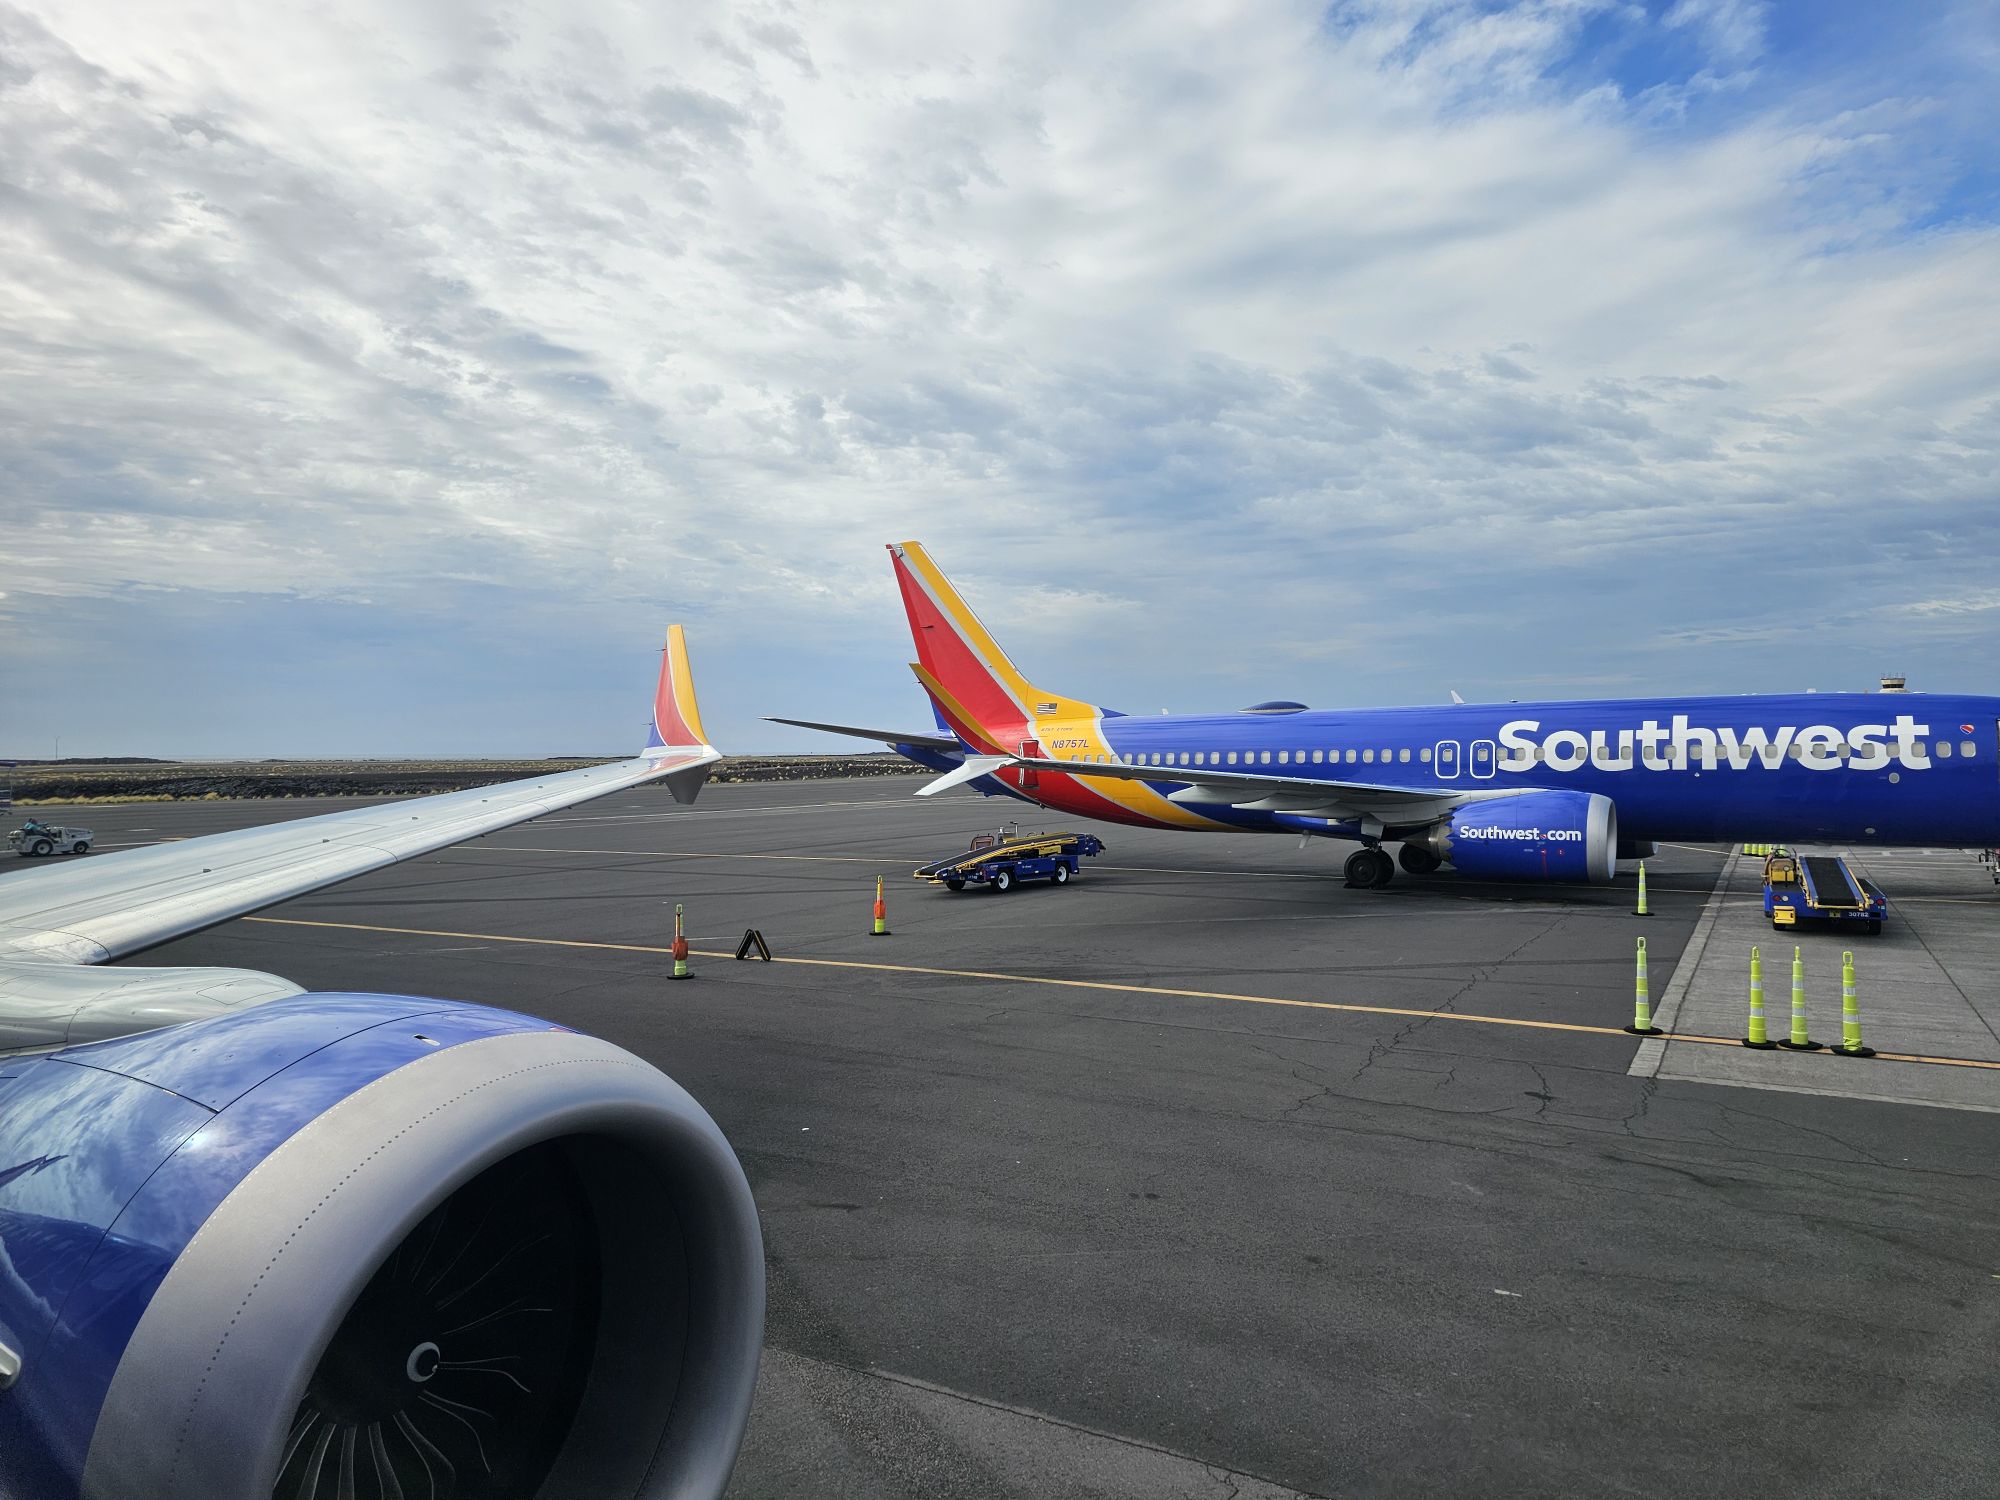 Southwest Launches Wanna Go Wednesdays for Last-Minute Deals